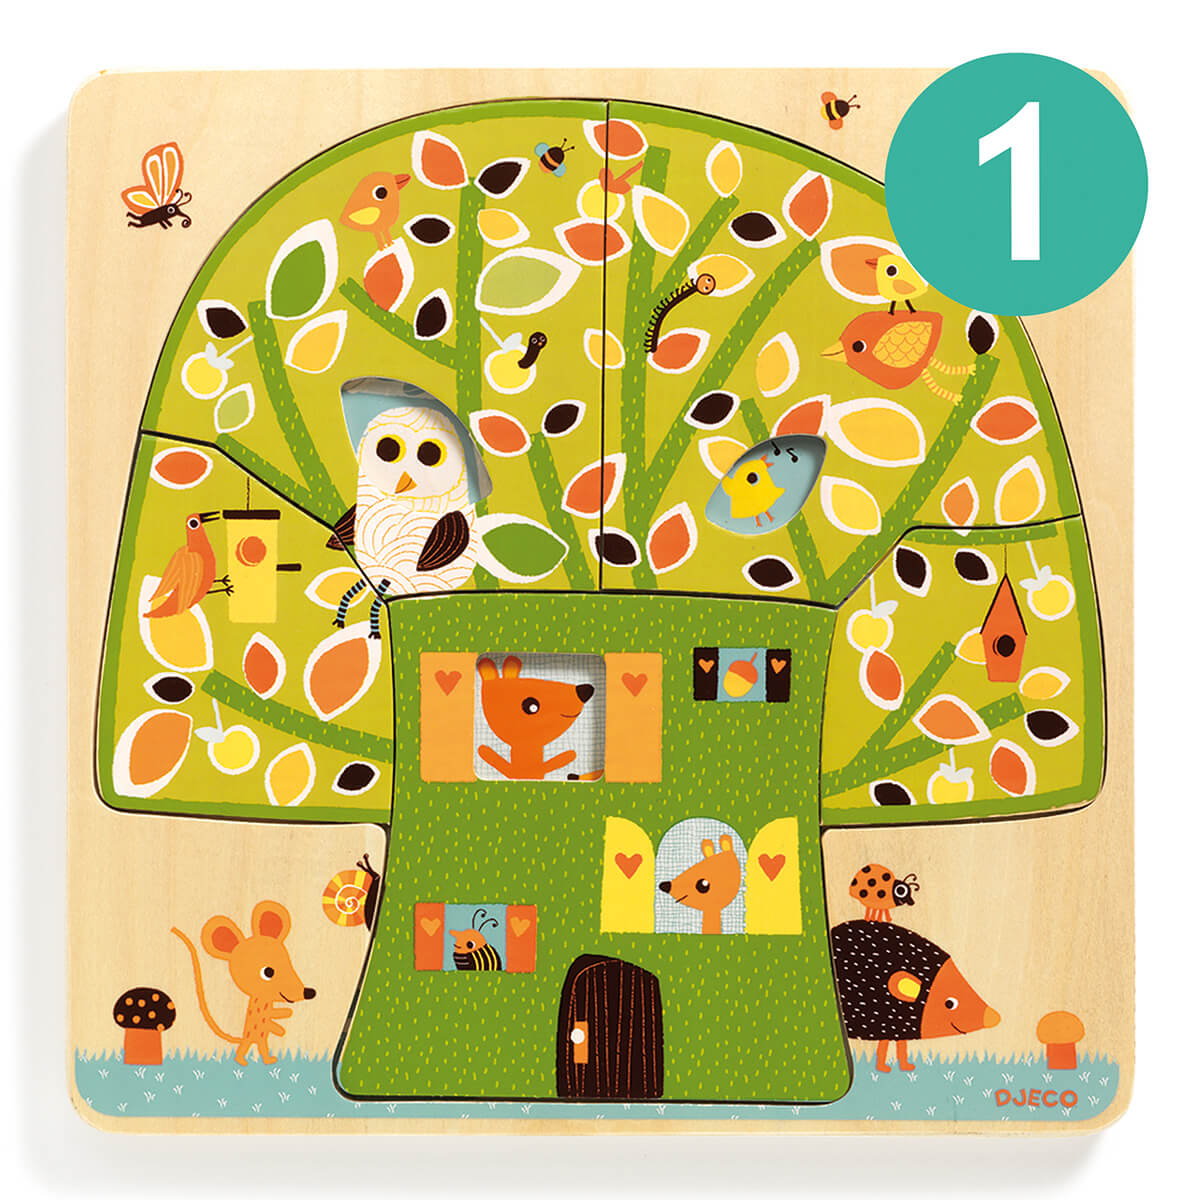 Chez Nut 3 Layer Wooden Puzzle by Djeco – Junior Edition